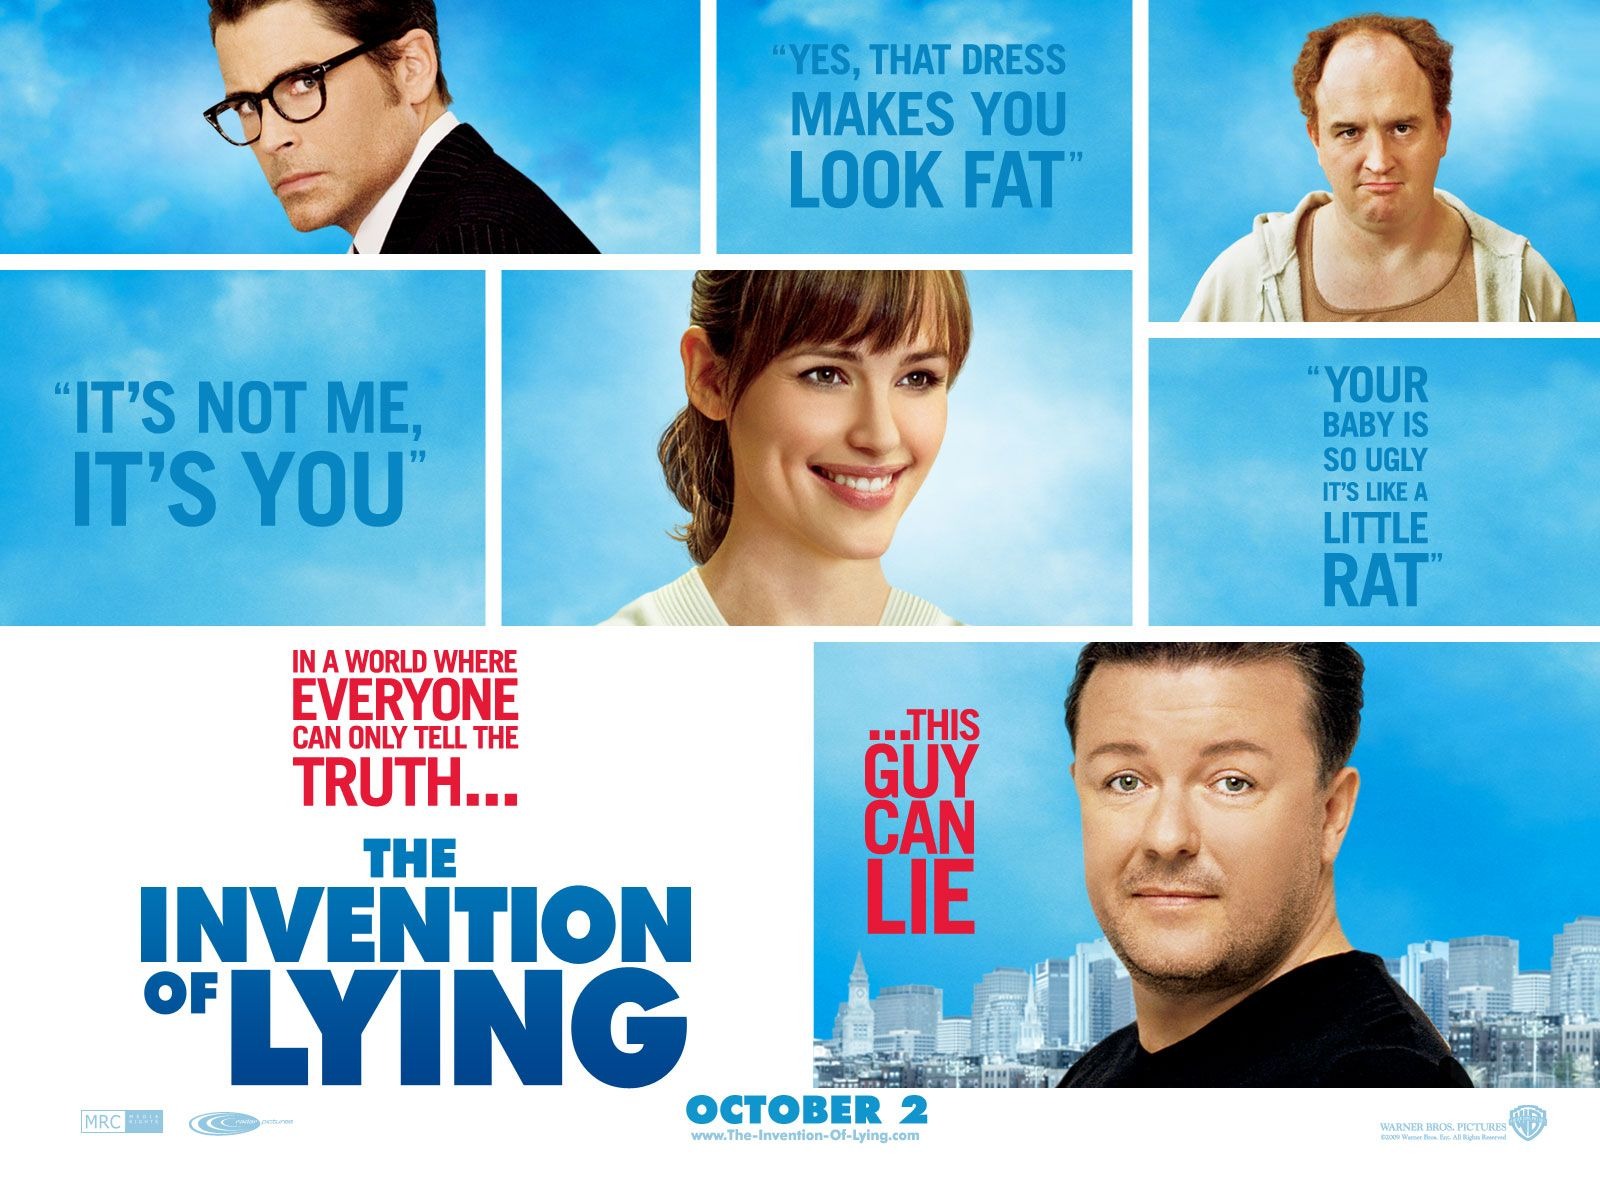 The Invention of Lying HD Wallpaper #25 - 1600x1200